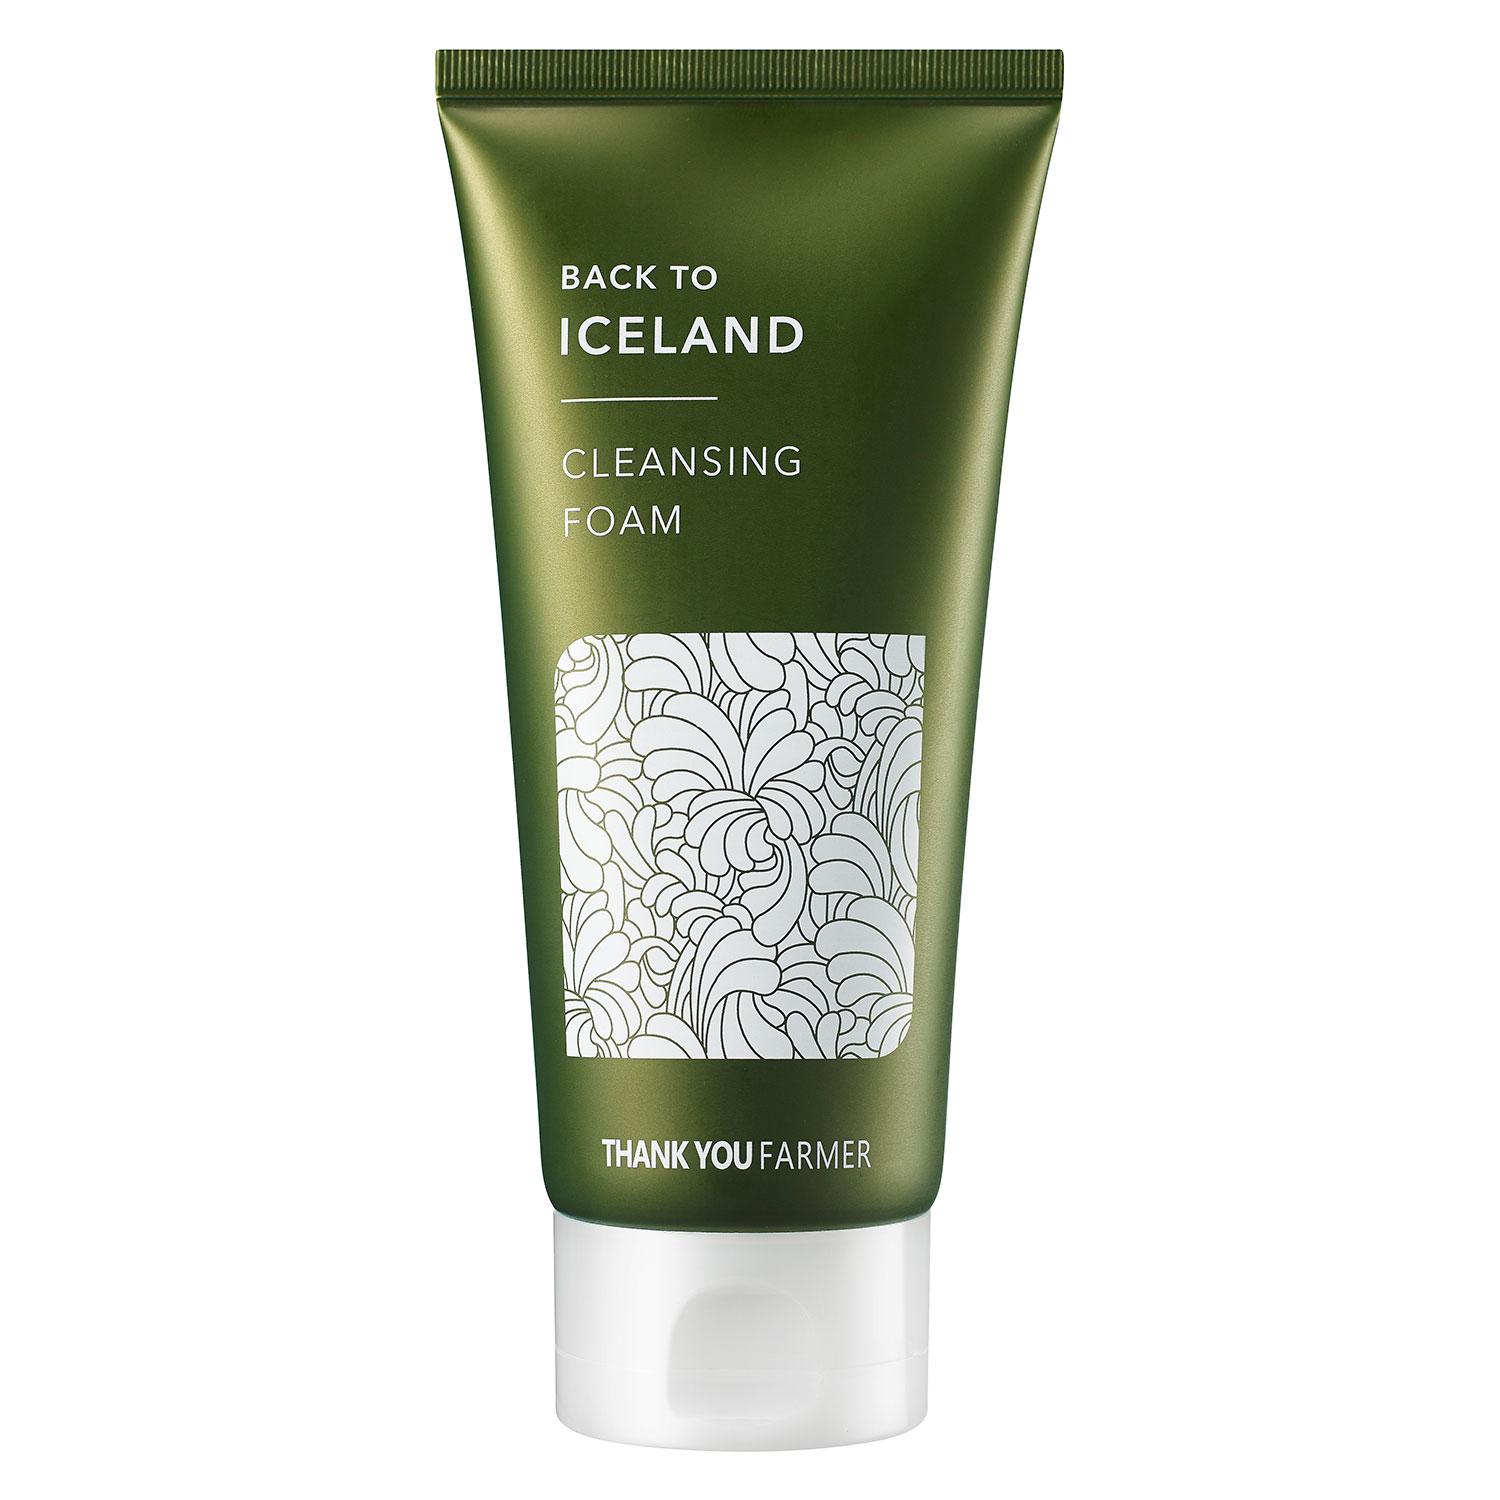 THANK YOU FARMER - Back To Iceland Cleansing Foam